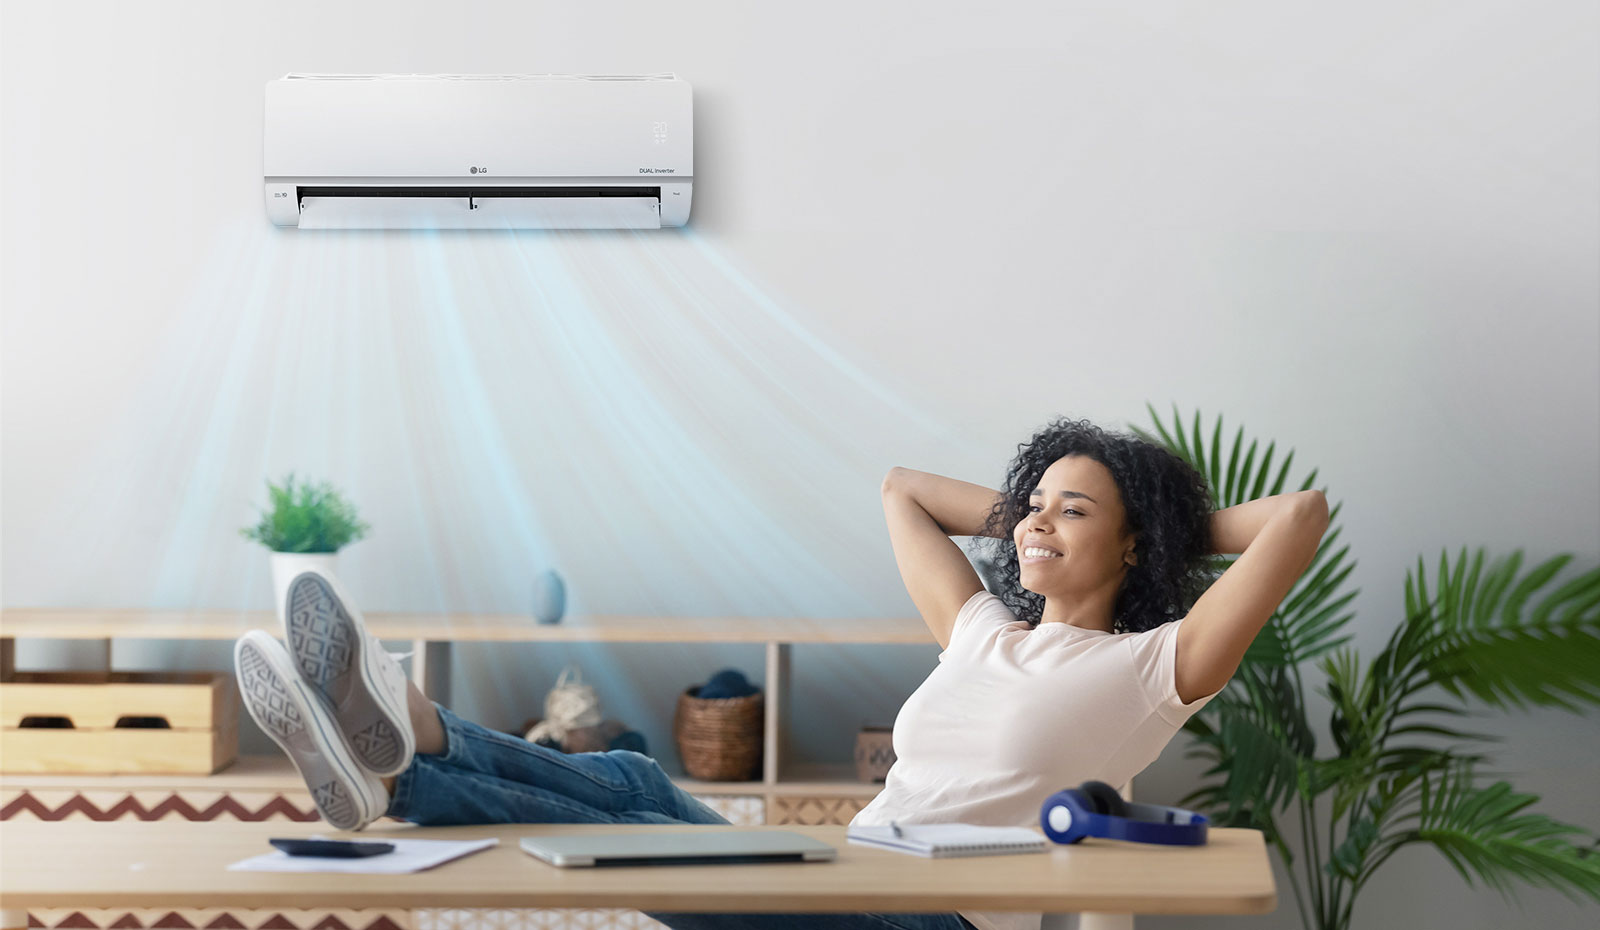 Woman closing eyes and relaxing under silent air conditioner.